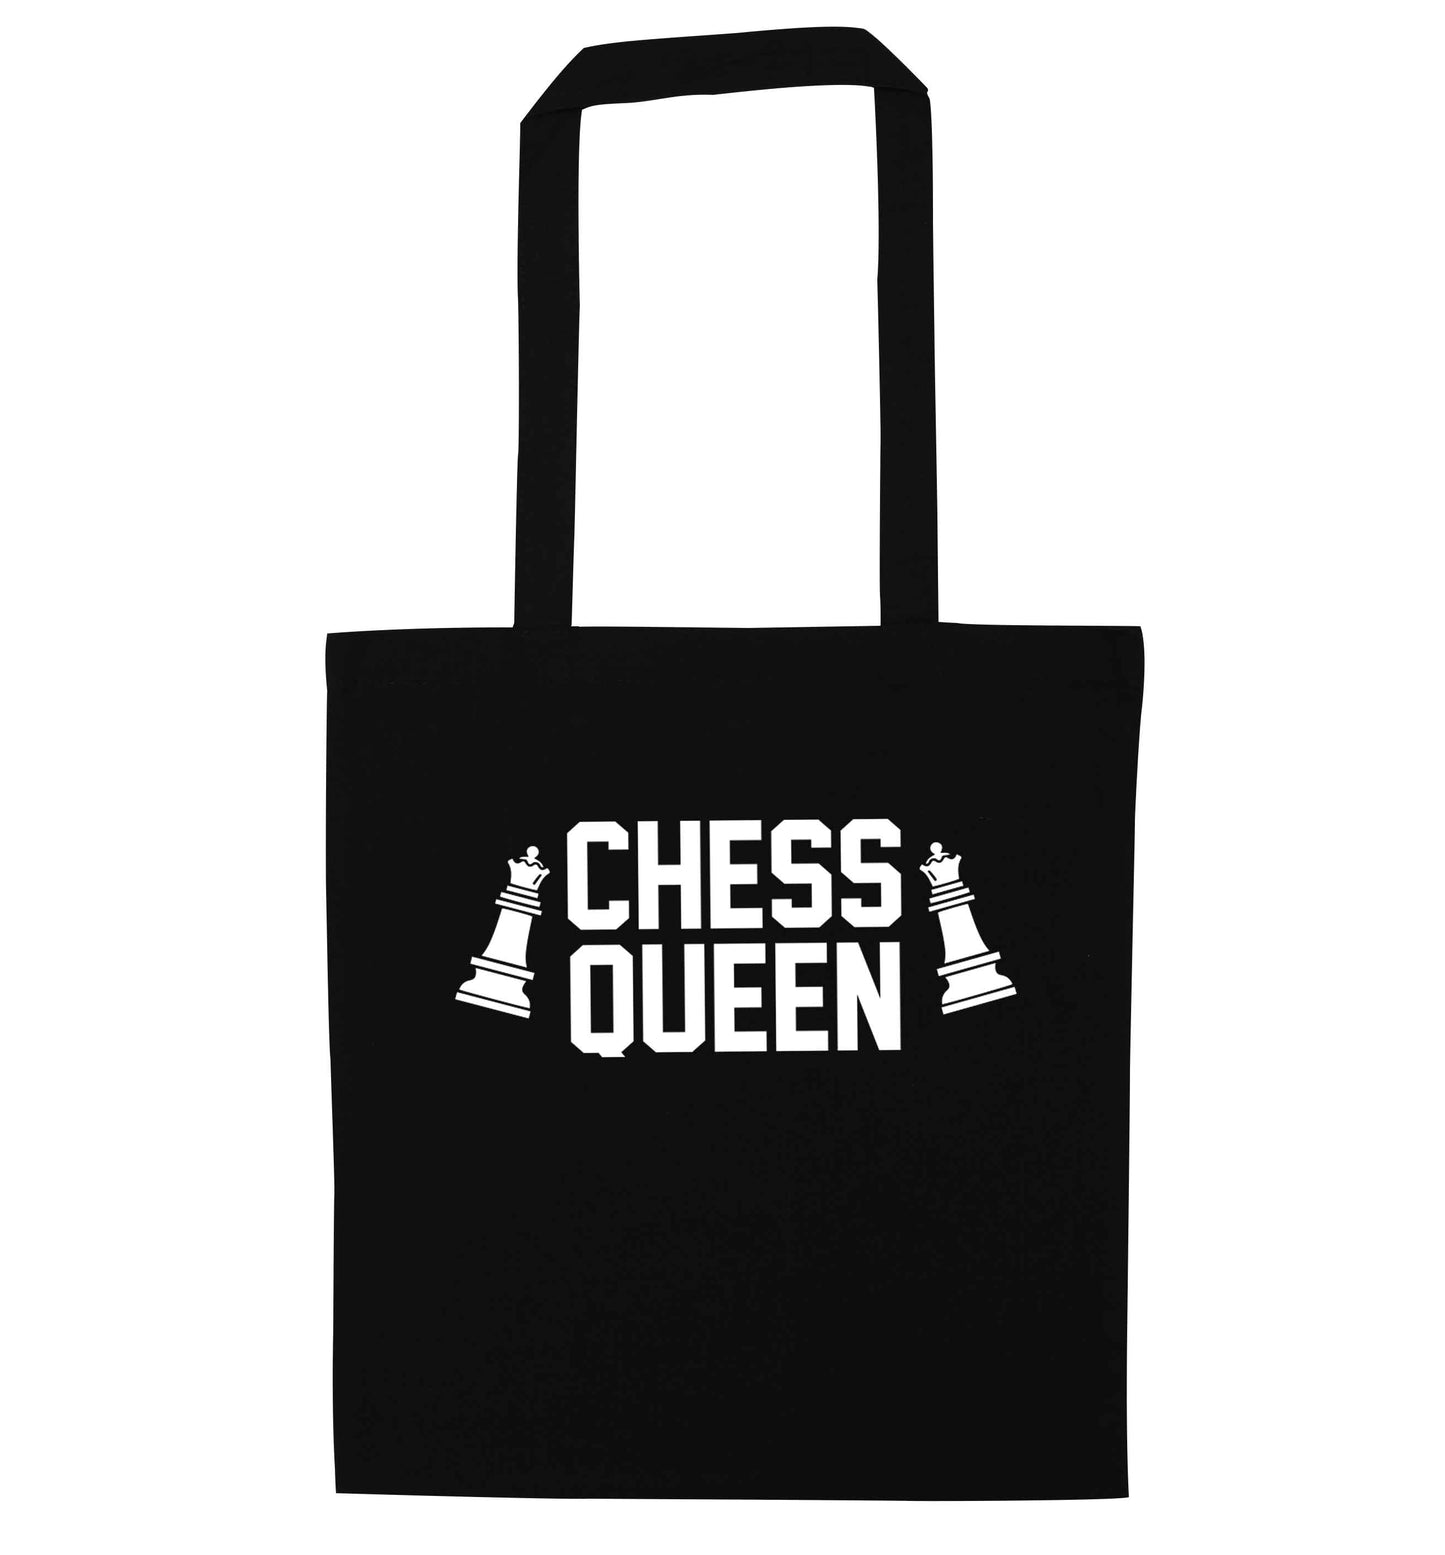 Chess queen black tote bag